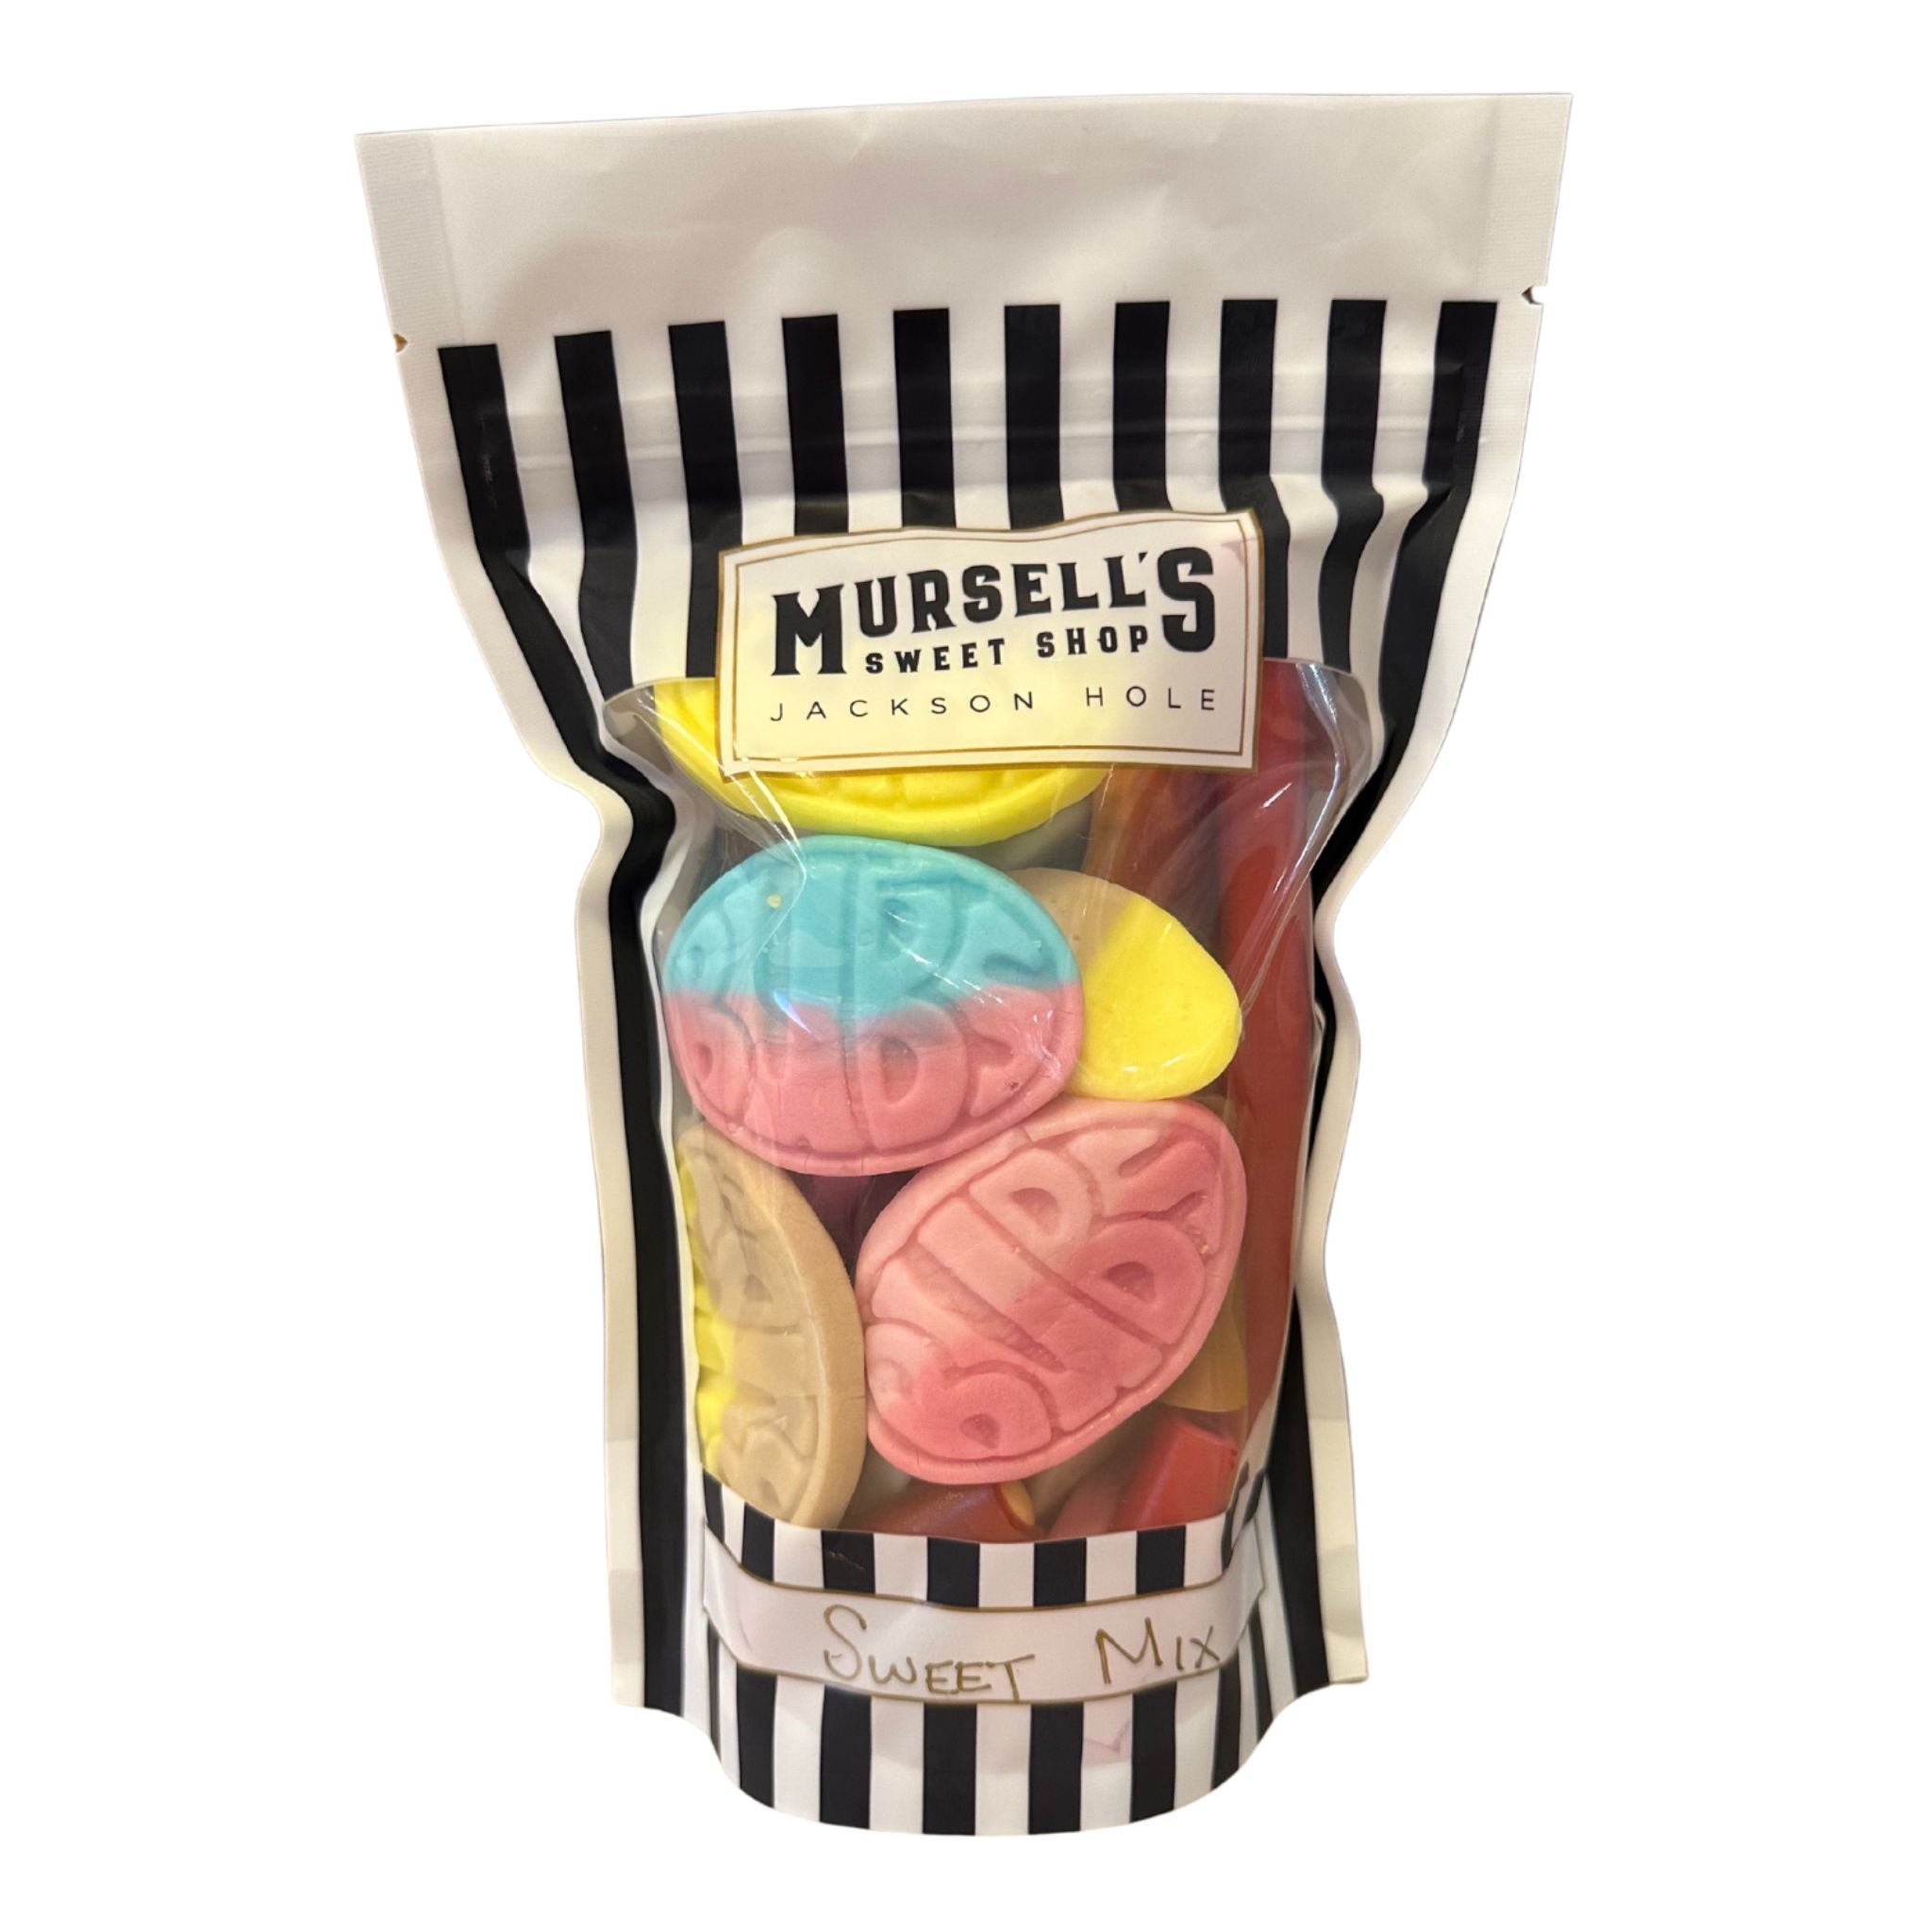 A bag of Swedish candy from Mursell's